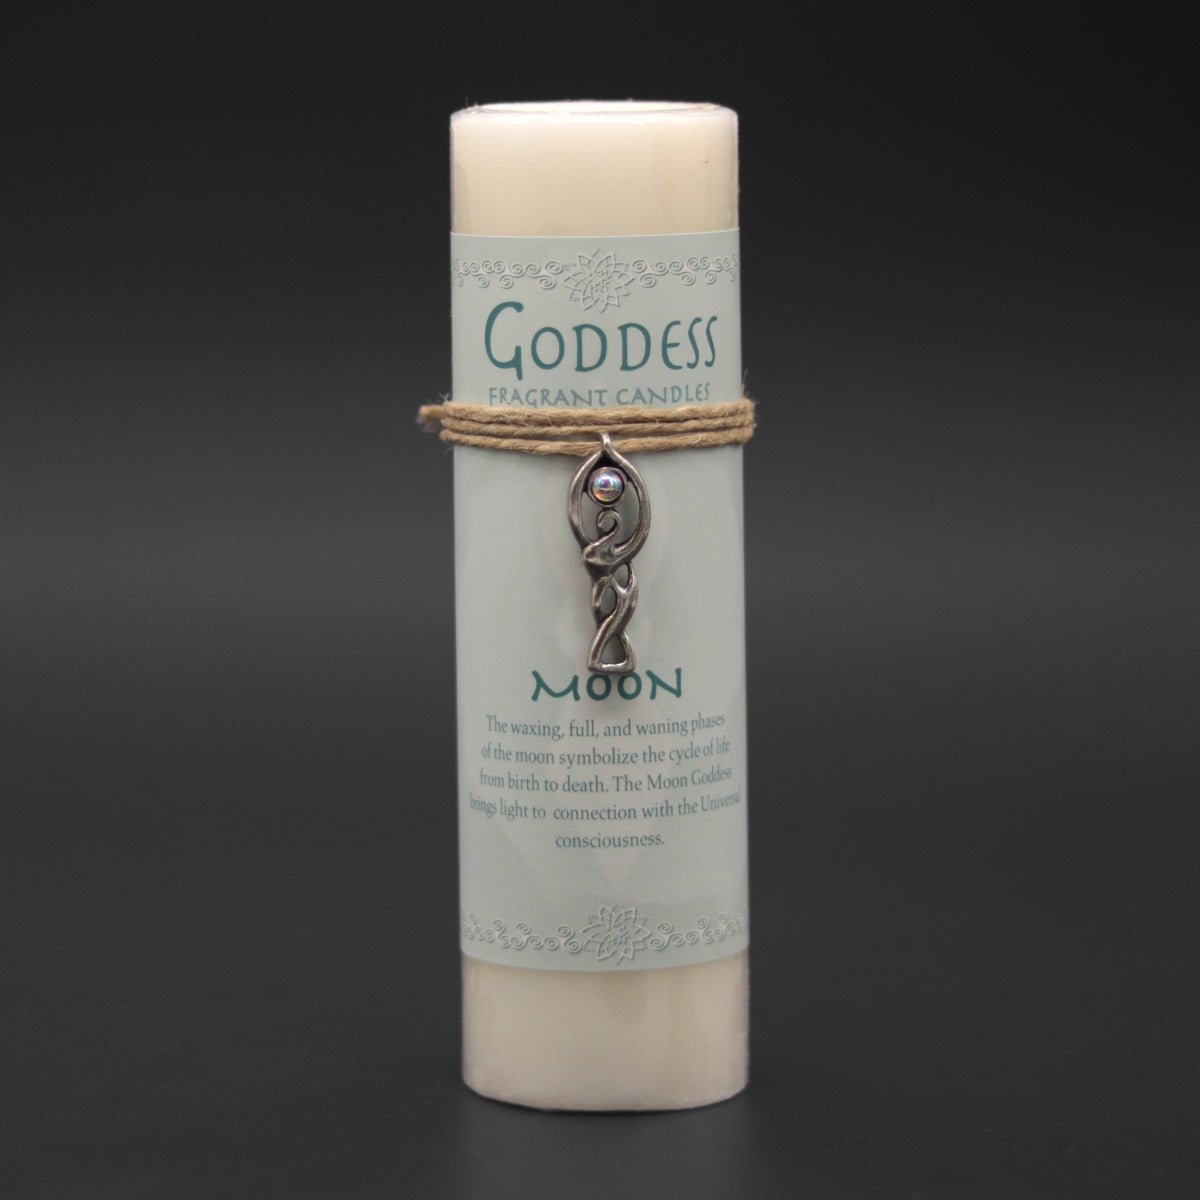 Goddess Moon Candle with Pendant - 13 Moons